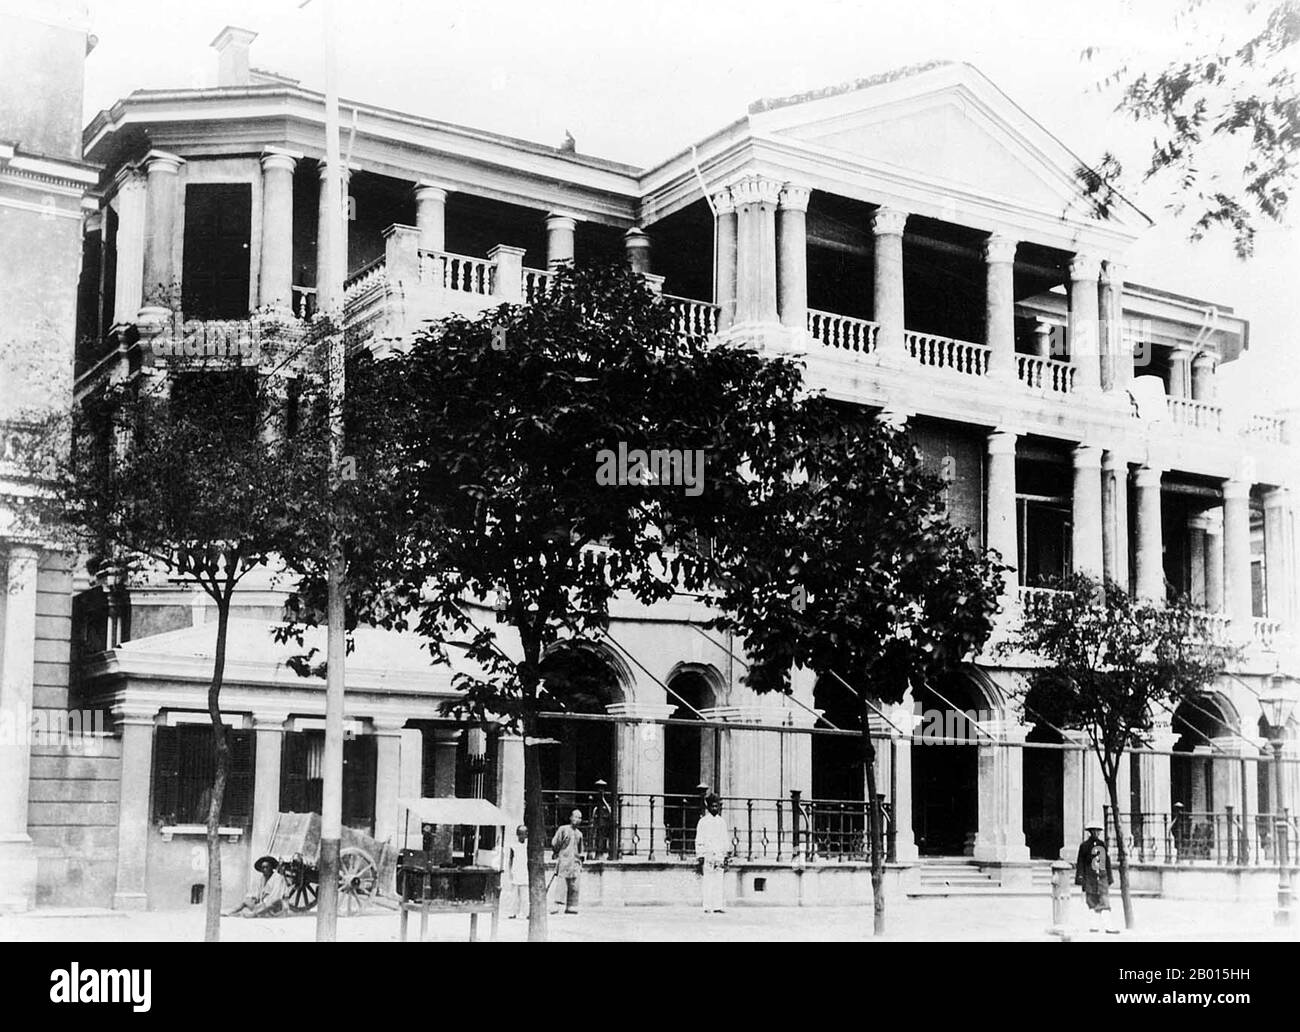 China: Shanghai - The (Old) Shanghai Club, 1902.  The original Shanghai Club was a three-storey red-brick building constructed by the British in 1861. The original Club was torn down and rebuilt in 1910 with reinforced concrete in a neo-classical design. The large first floor dining room had black and white marble flooring, while the entrance staircase used imported white Sicilian marble.  The club was a British men's club and was the most exclusive club in Shanghai during the heyday of the 1920s and 1930s. The membership fee was $125 and monthly dues were $9. Stock Photo